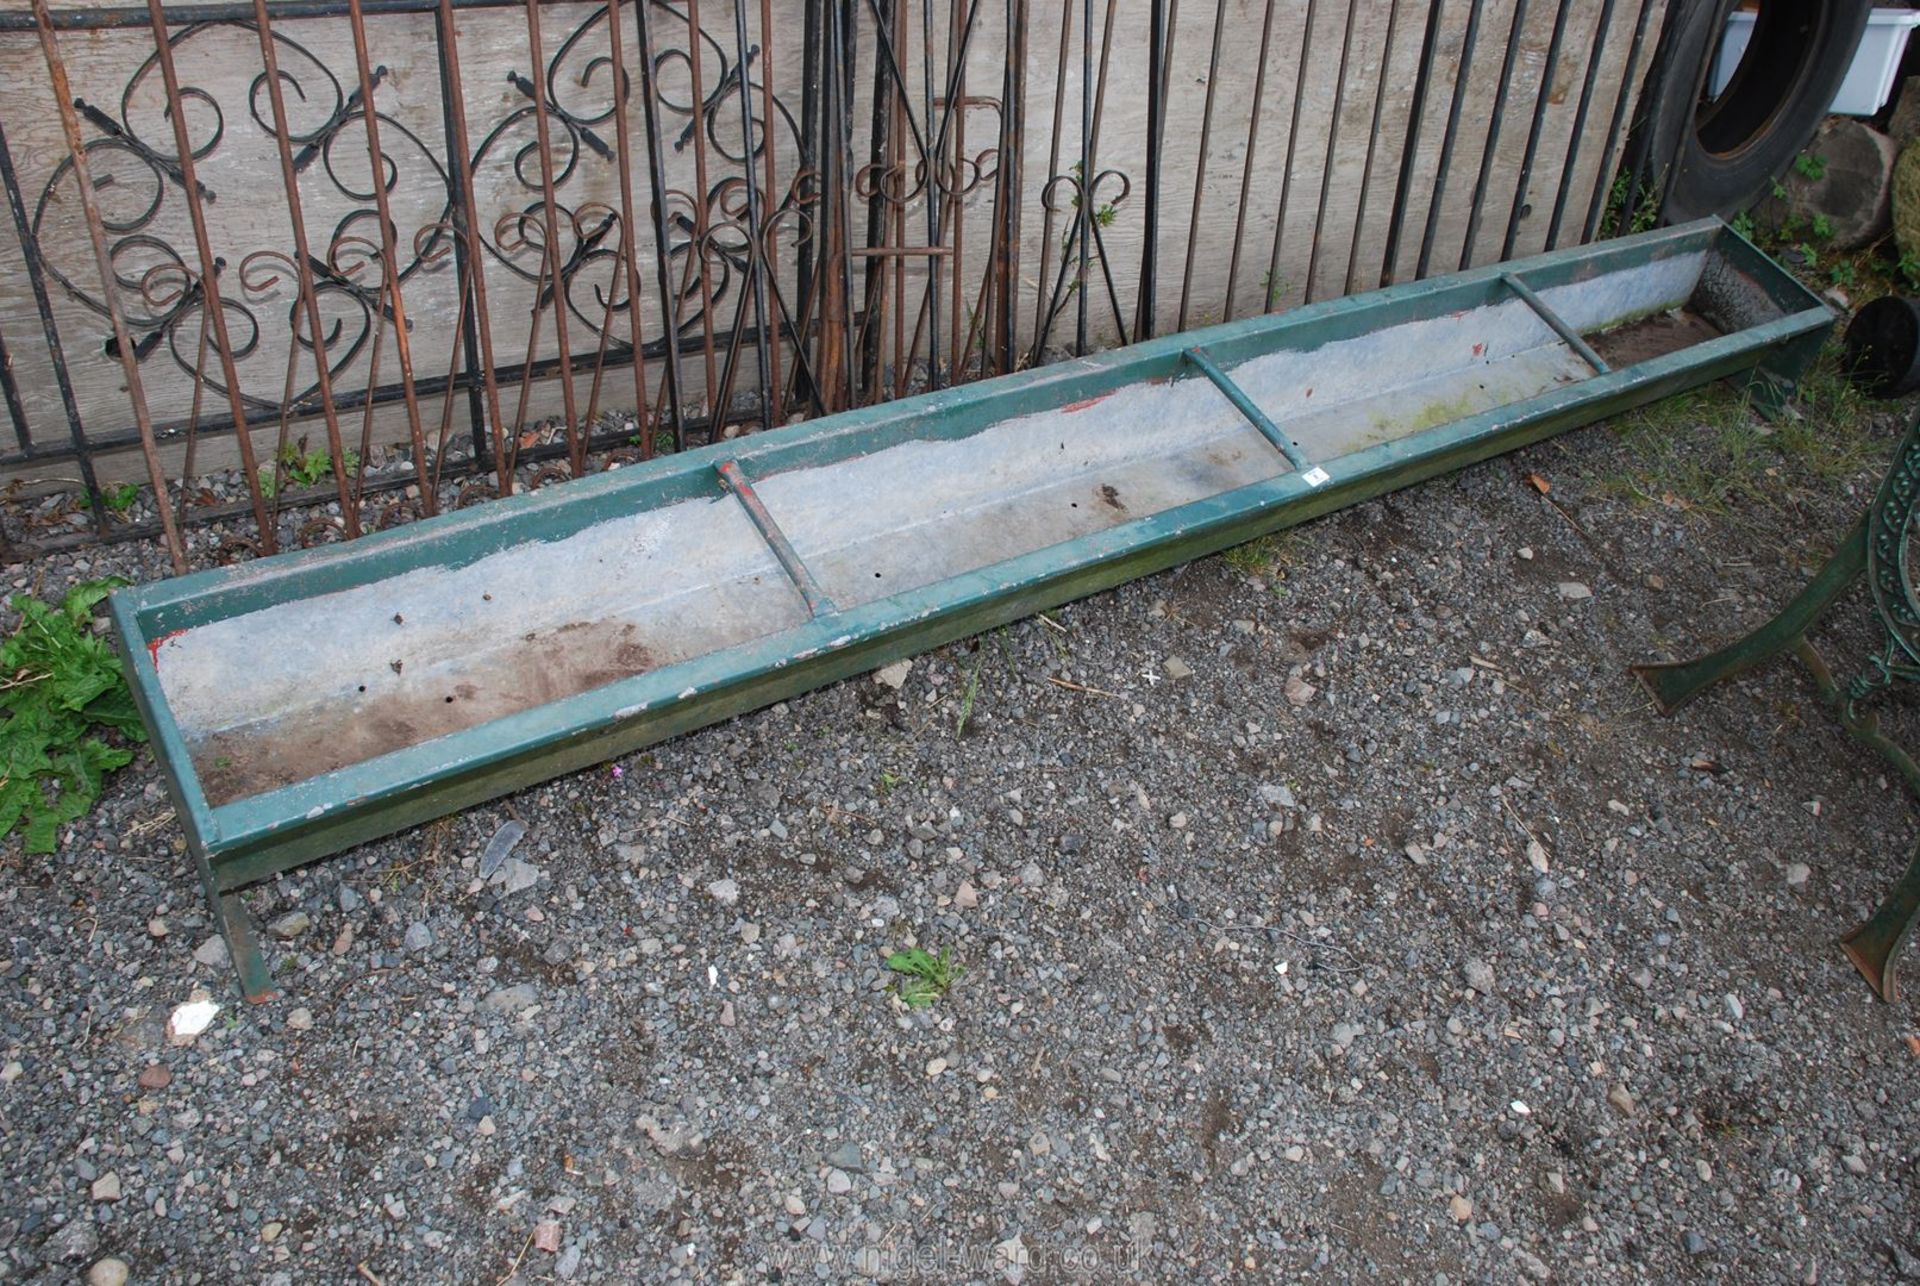 A galvanised sheep trough.